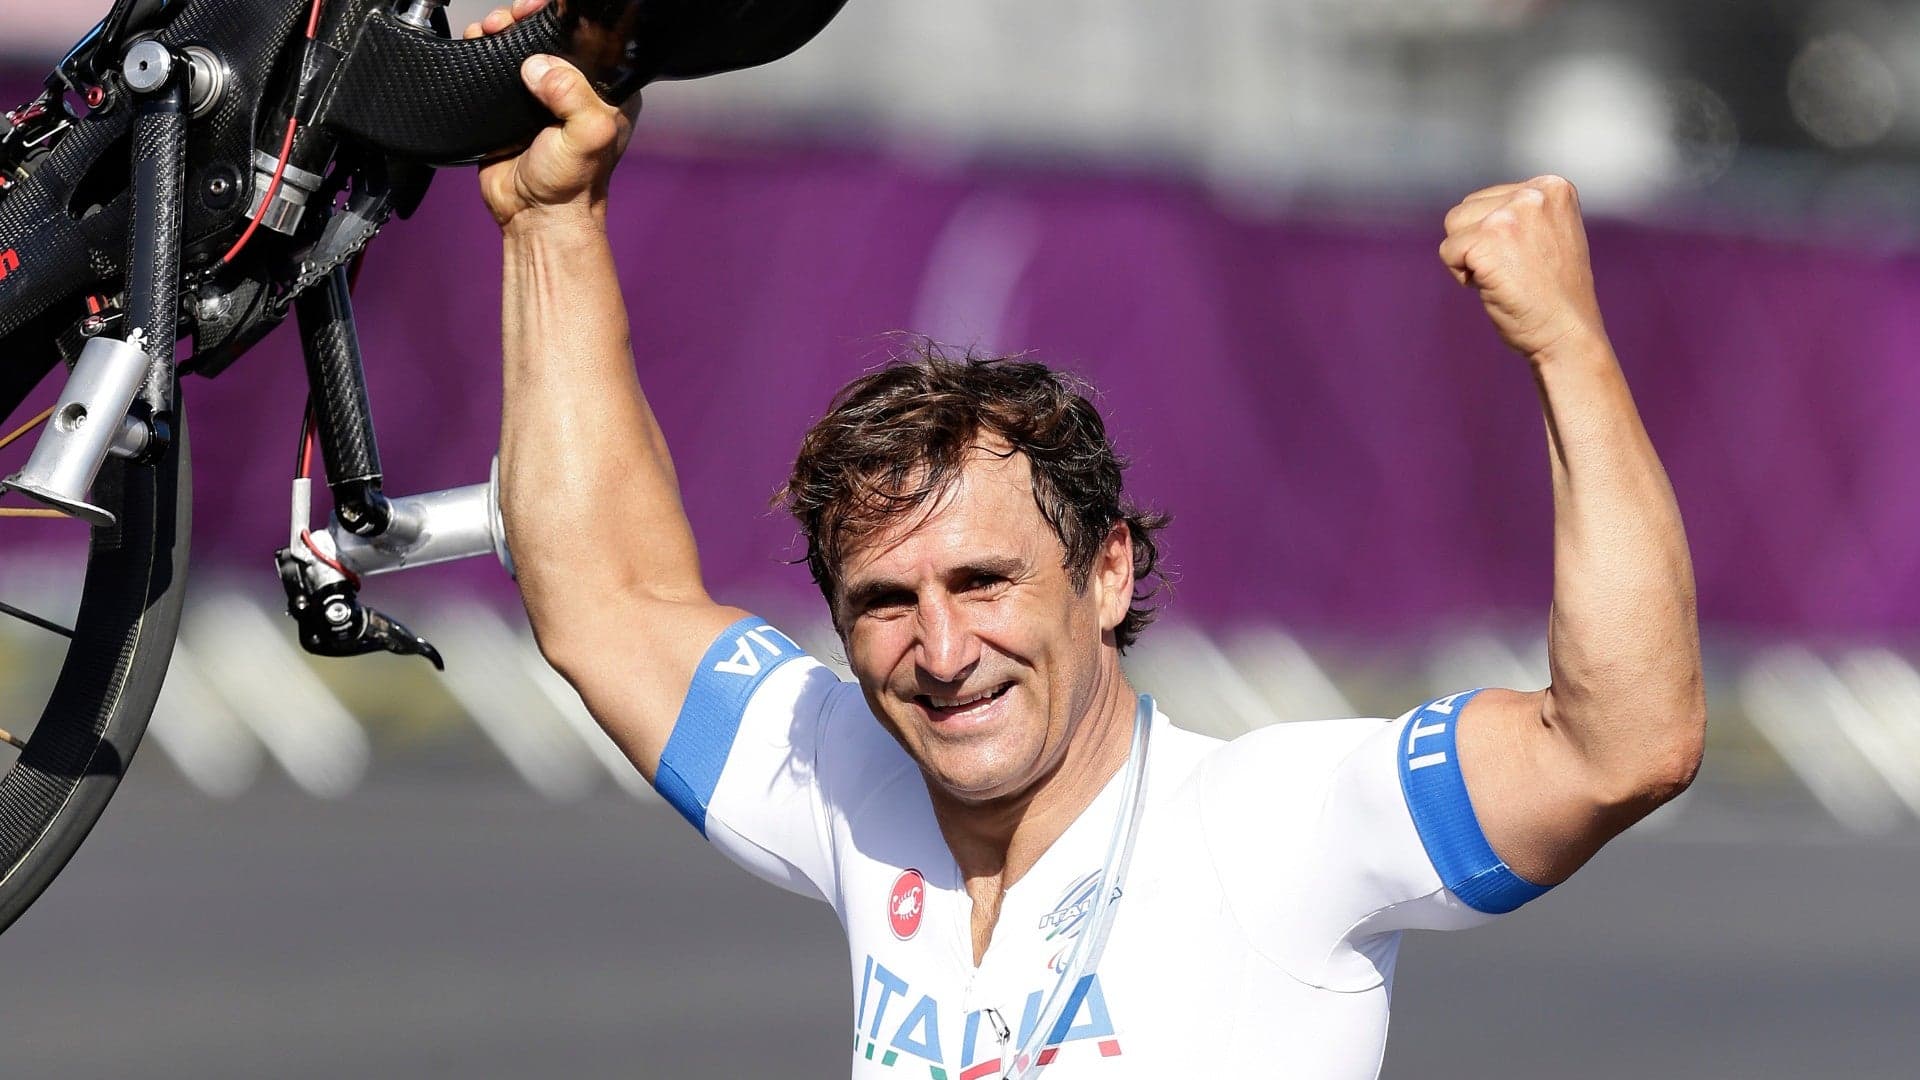 Racing Hero Alex Zanardi Airlifted After Handcycling Crash in Italy